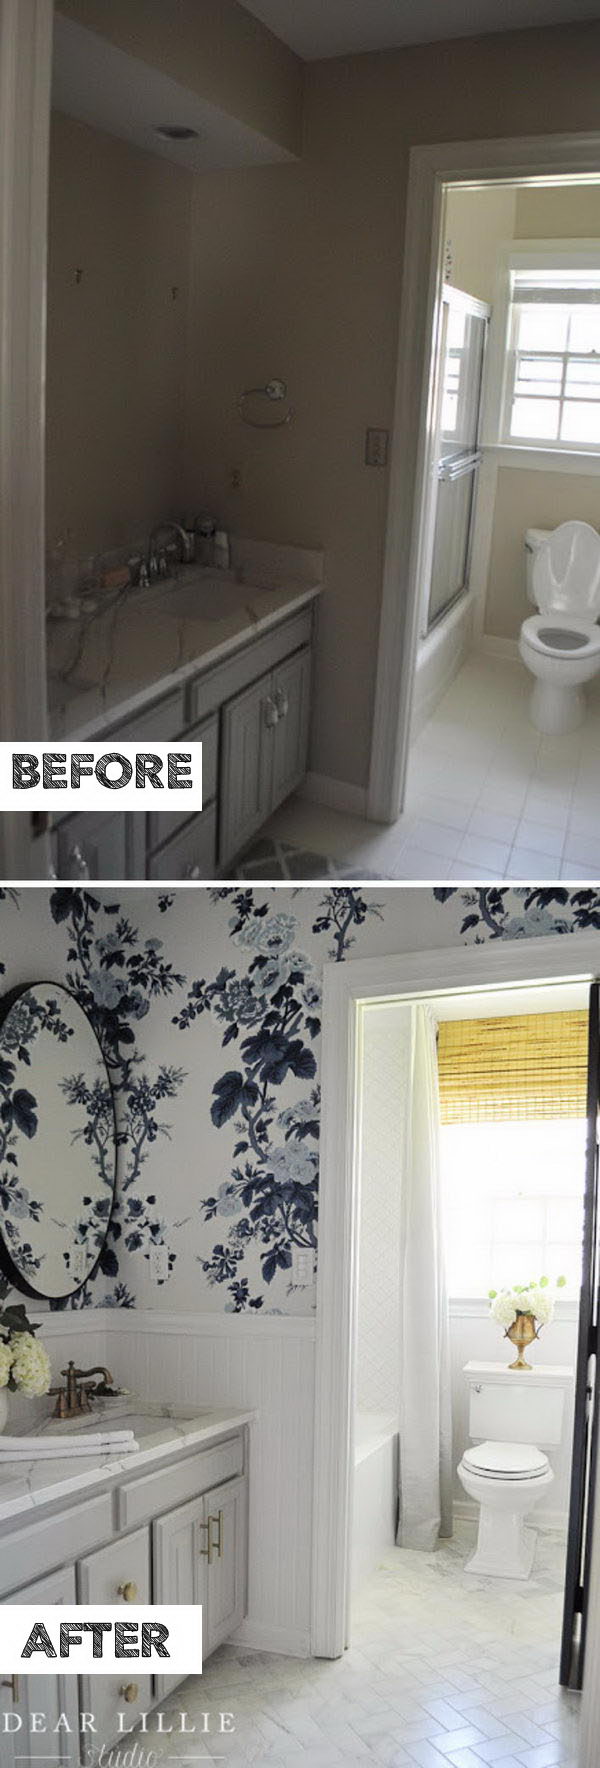 Go For A Fresh, Bright Update Using Wallpaper And Beadboard. 